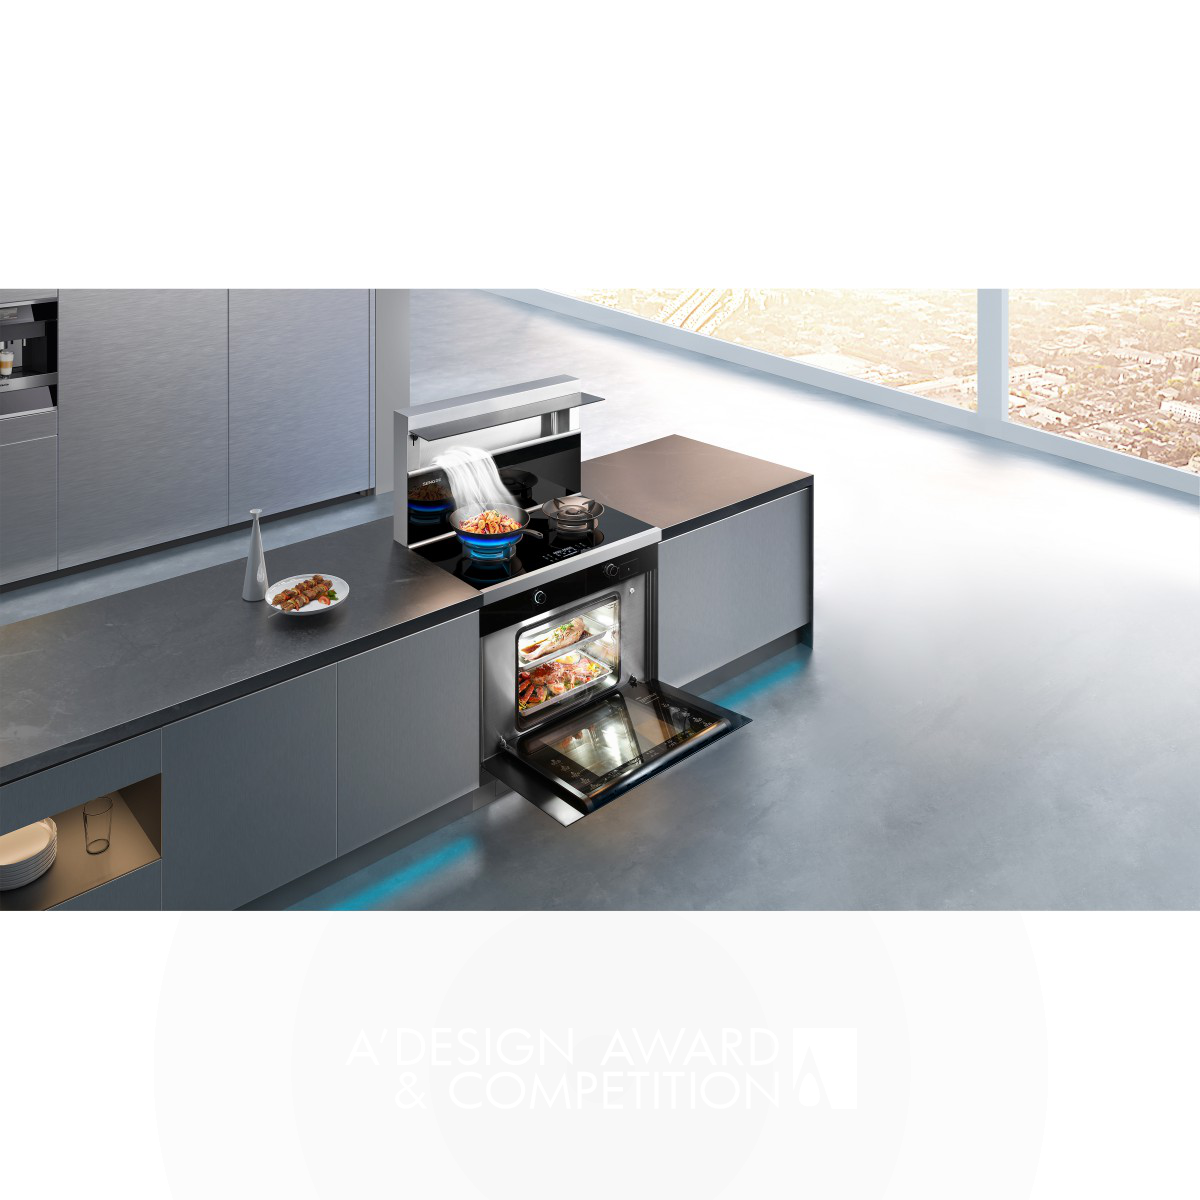 A8zk Steam Combi: A Modern and Elegant Oven Range